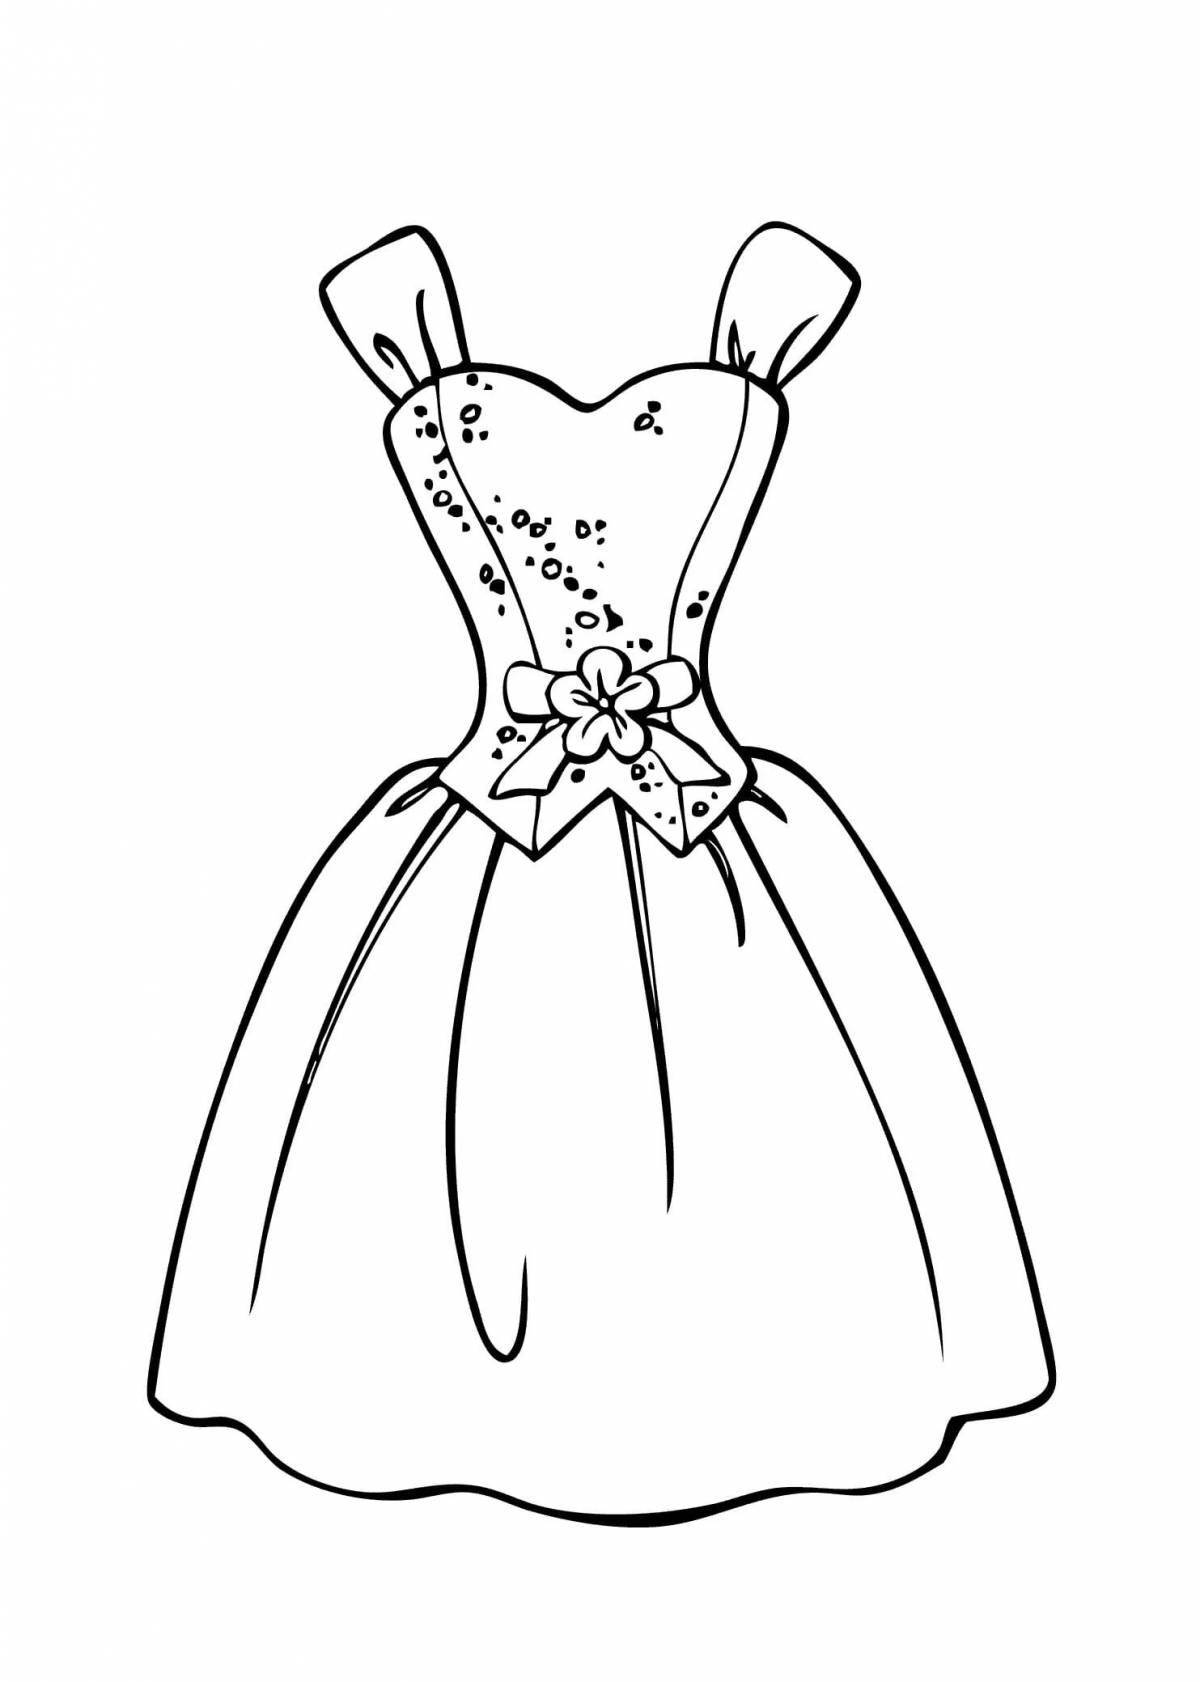 Intricate dress coloring page for 5-6 year olds